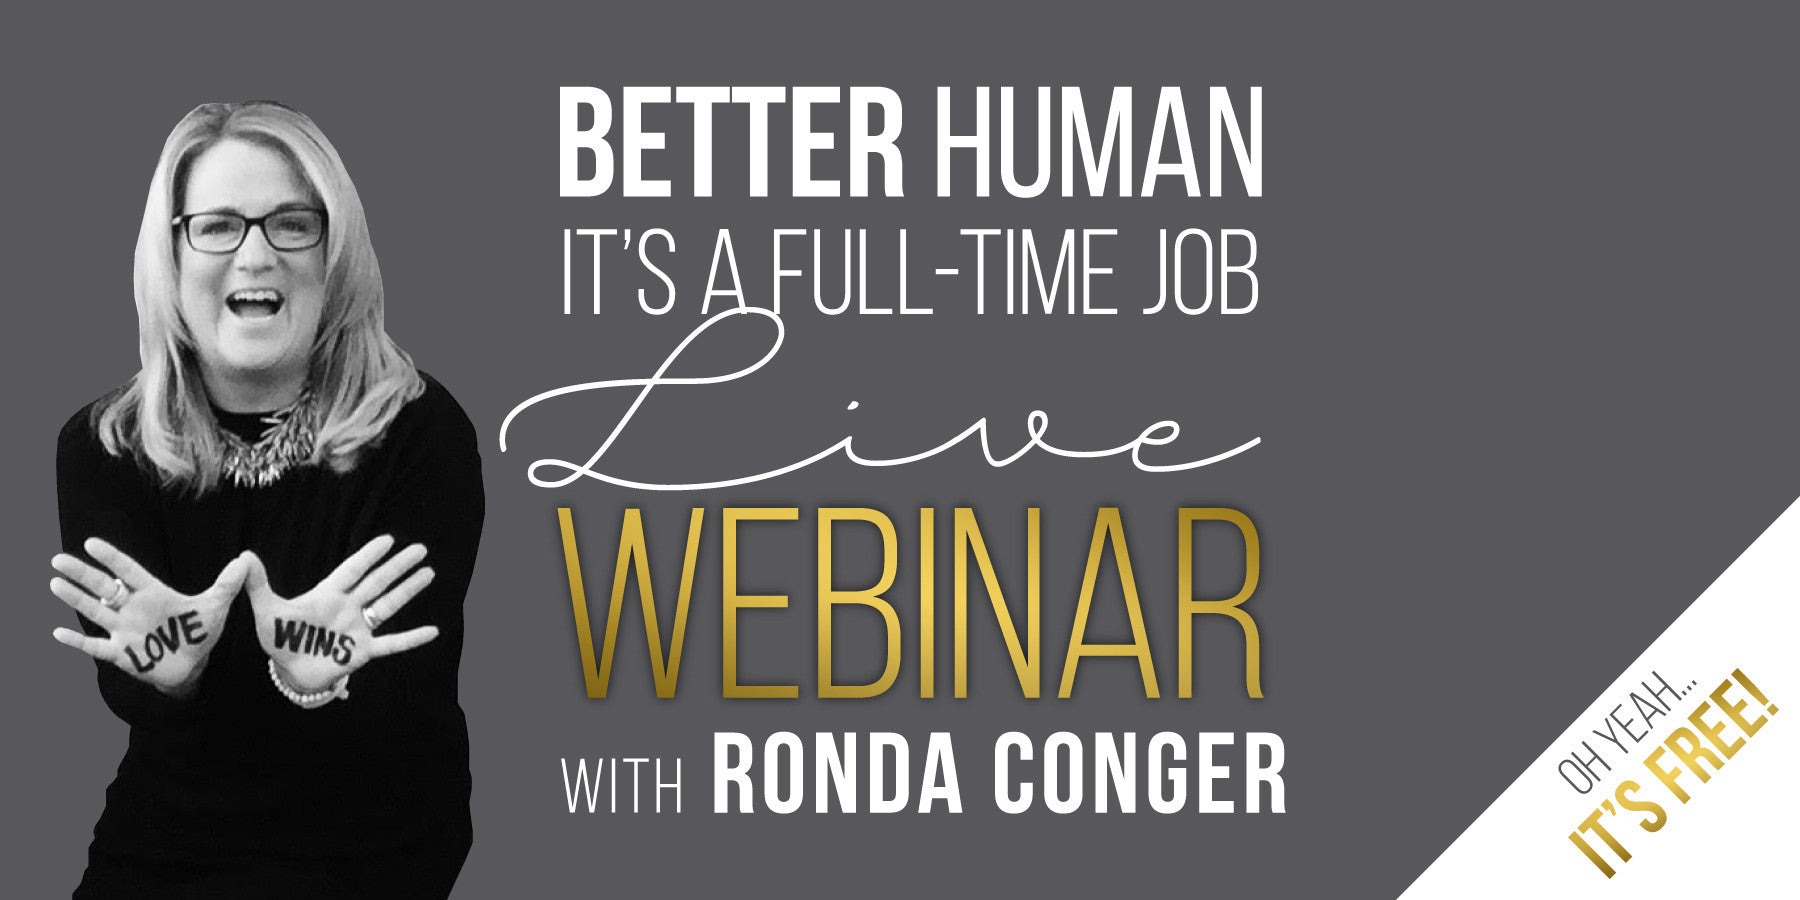 Better Human, It's a Full-Time Job with Ronda Conger